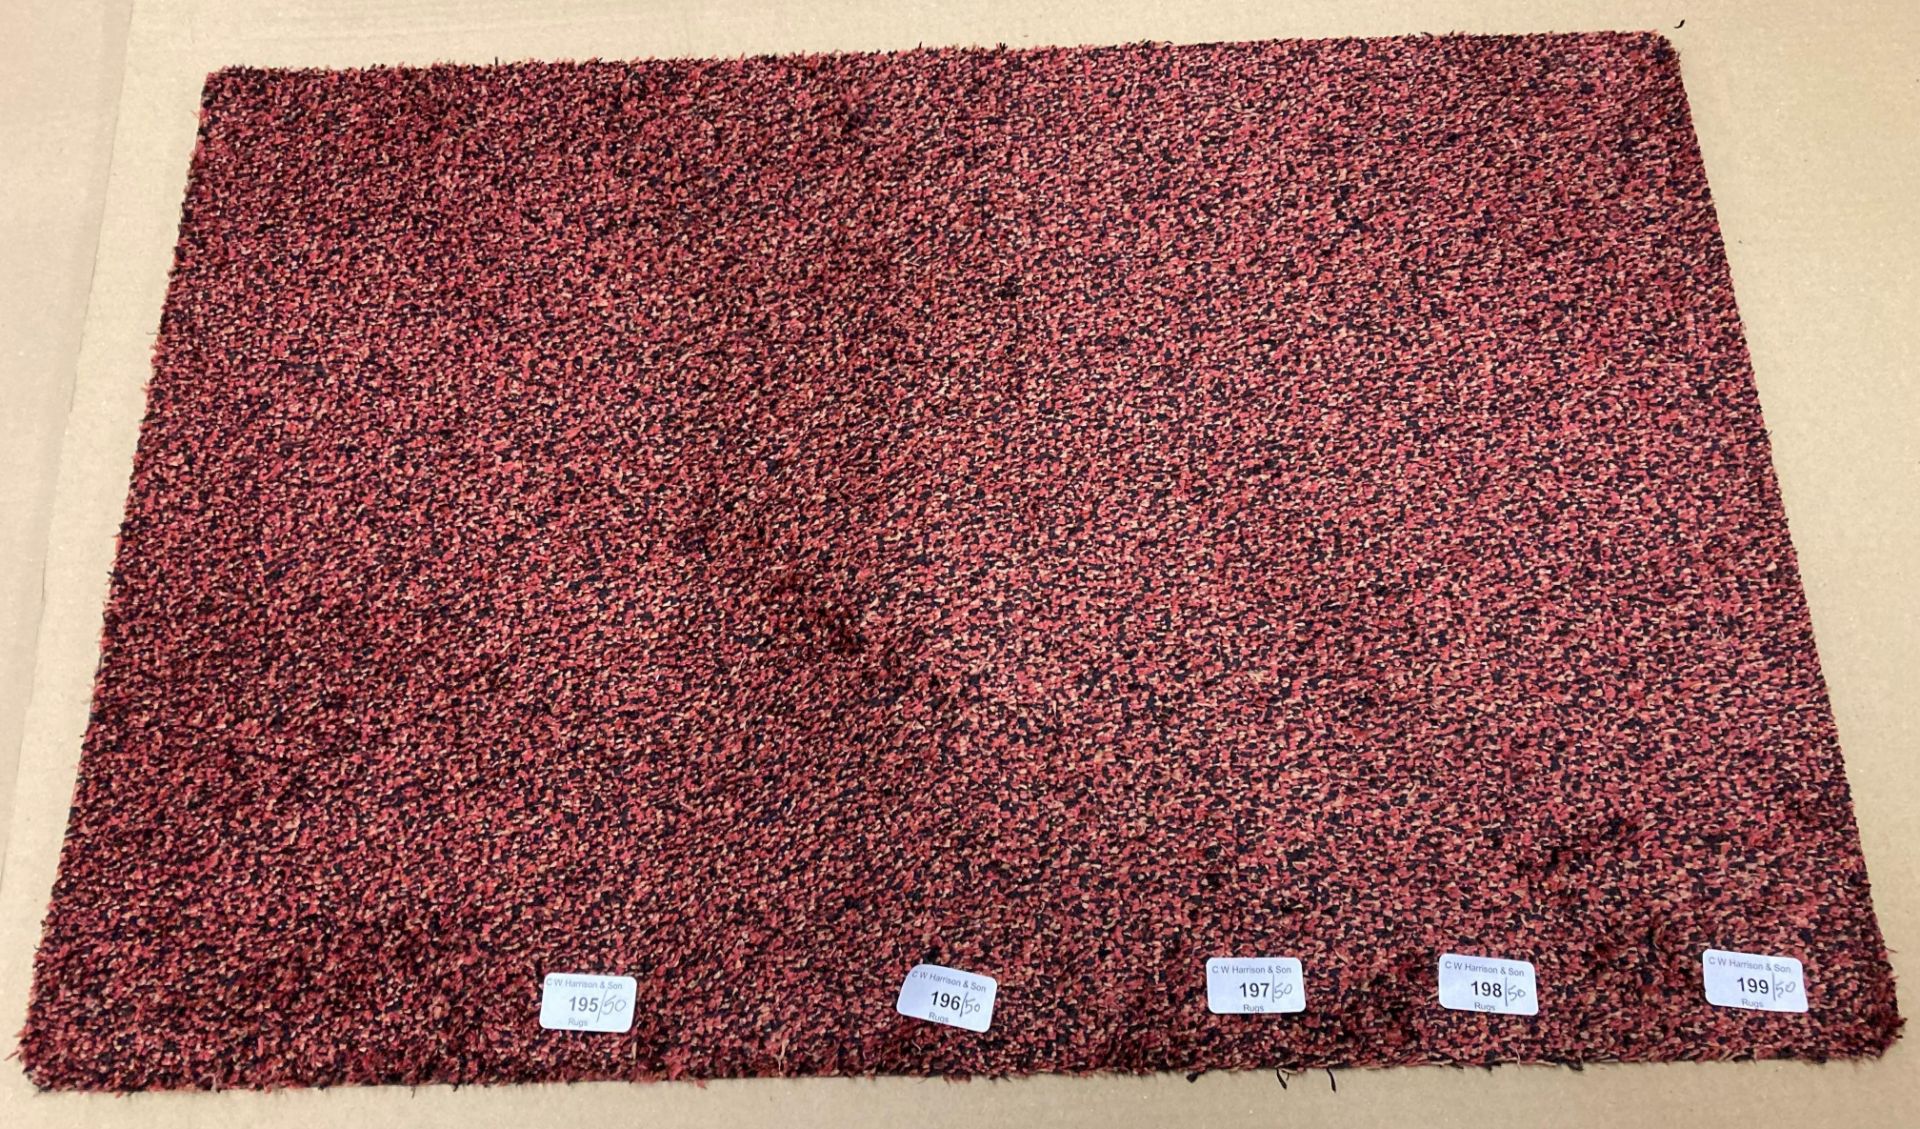 50 x Red and black speckled mats 75cm x 50cm (K05) *Please note the final purchase price is subject